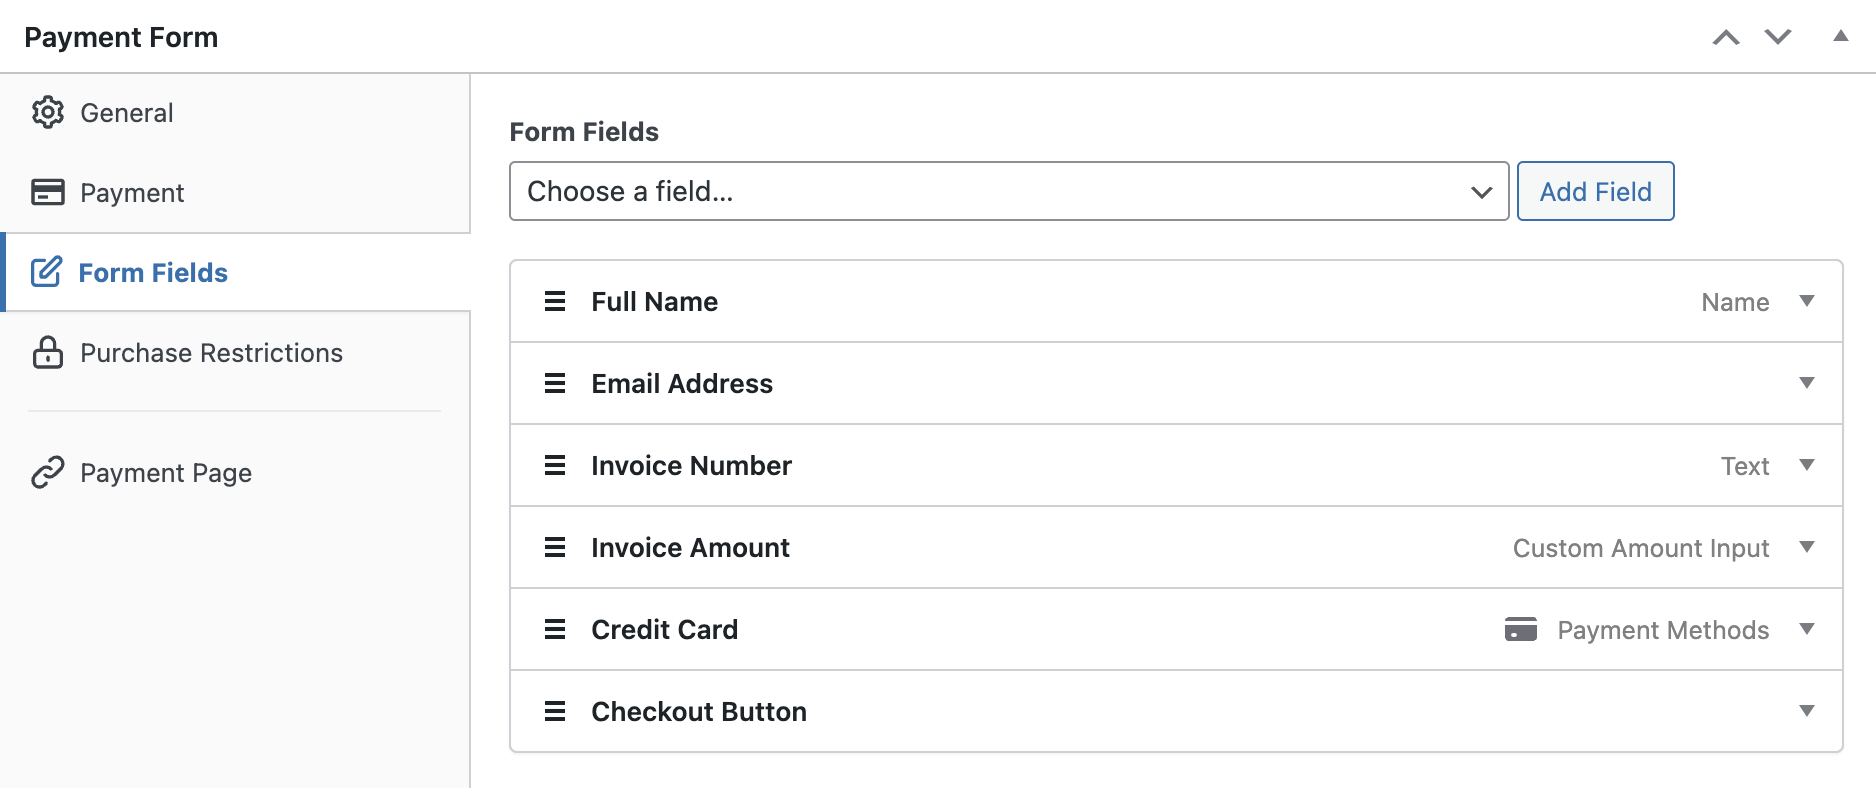 Invoice form fields